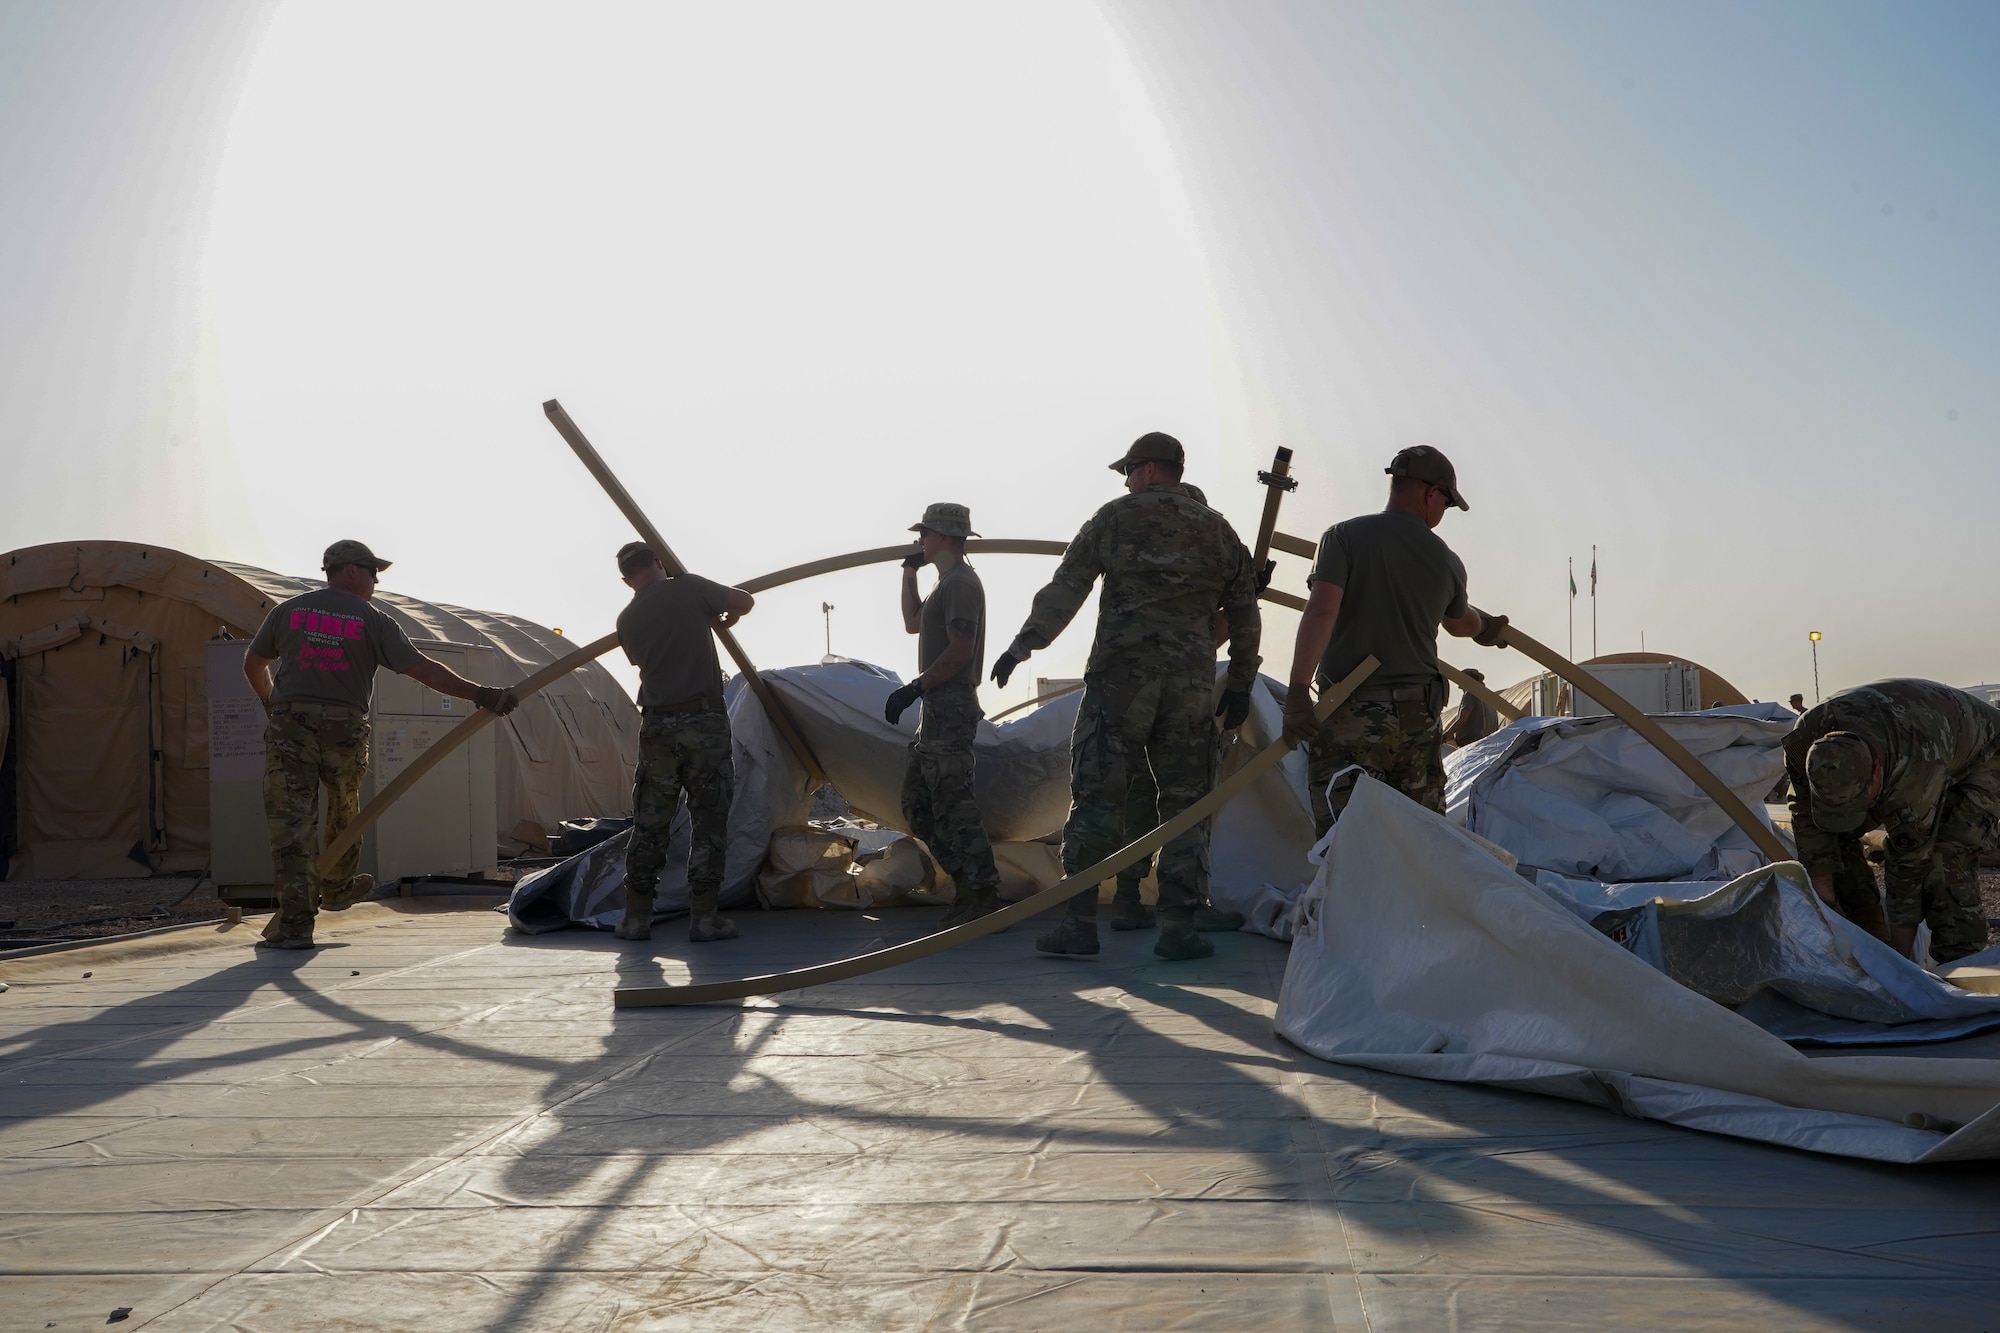 378th ECES disassemble tents as part of base improvement plan